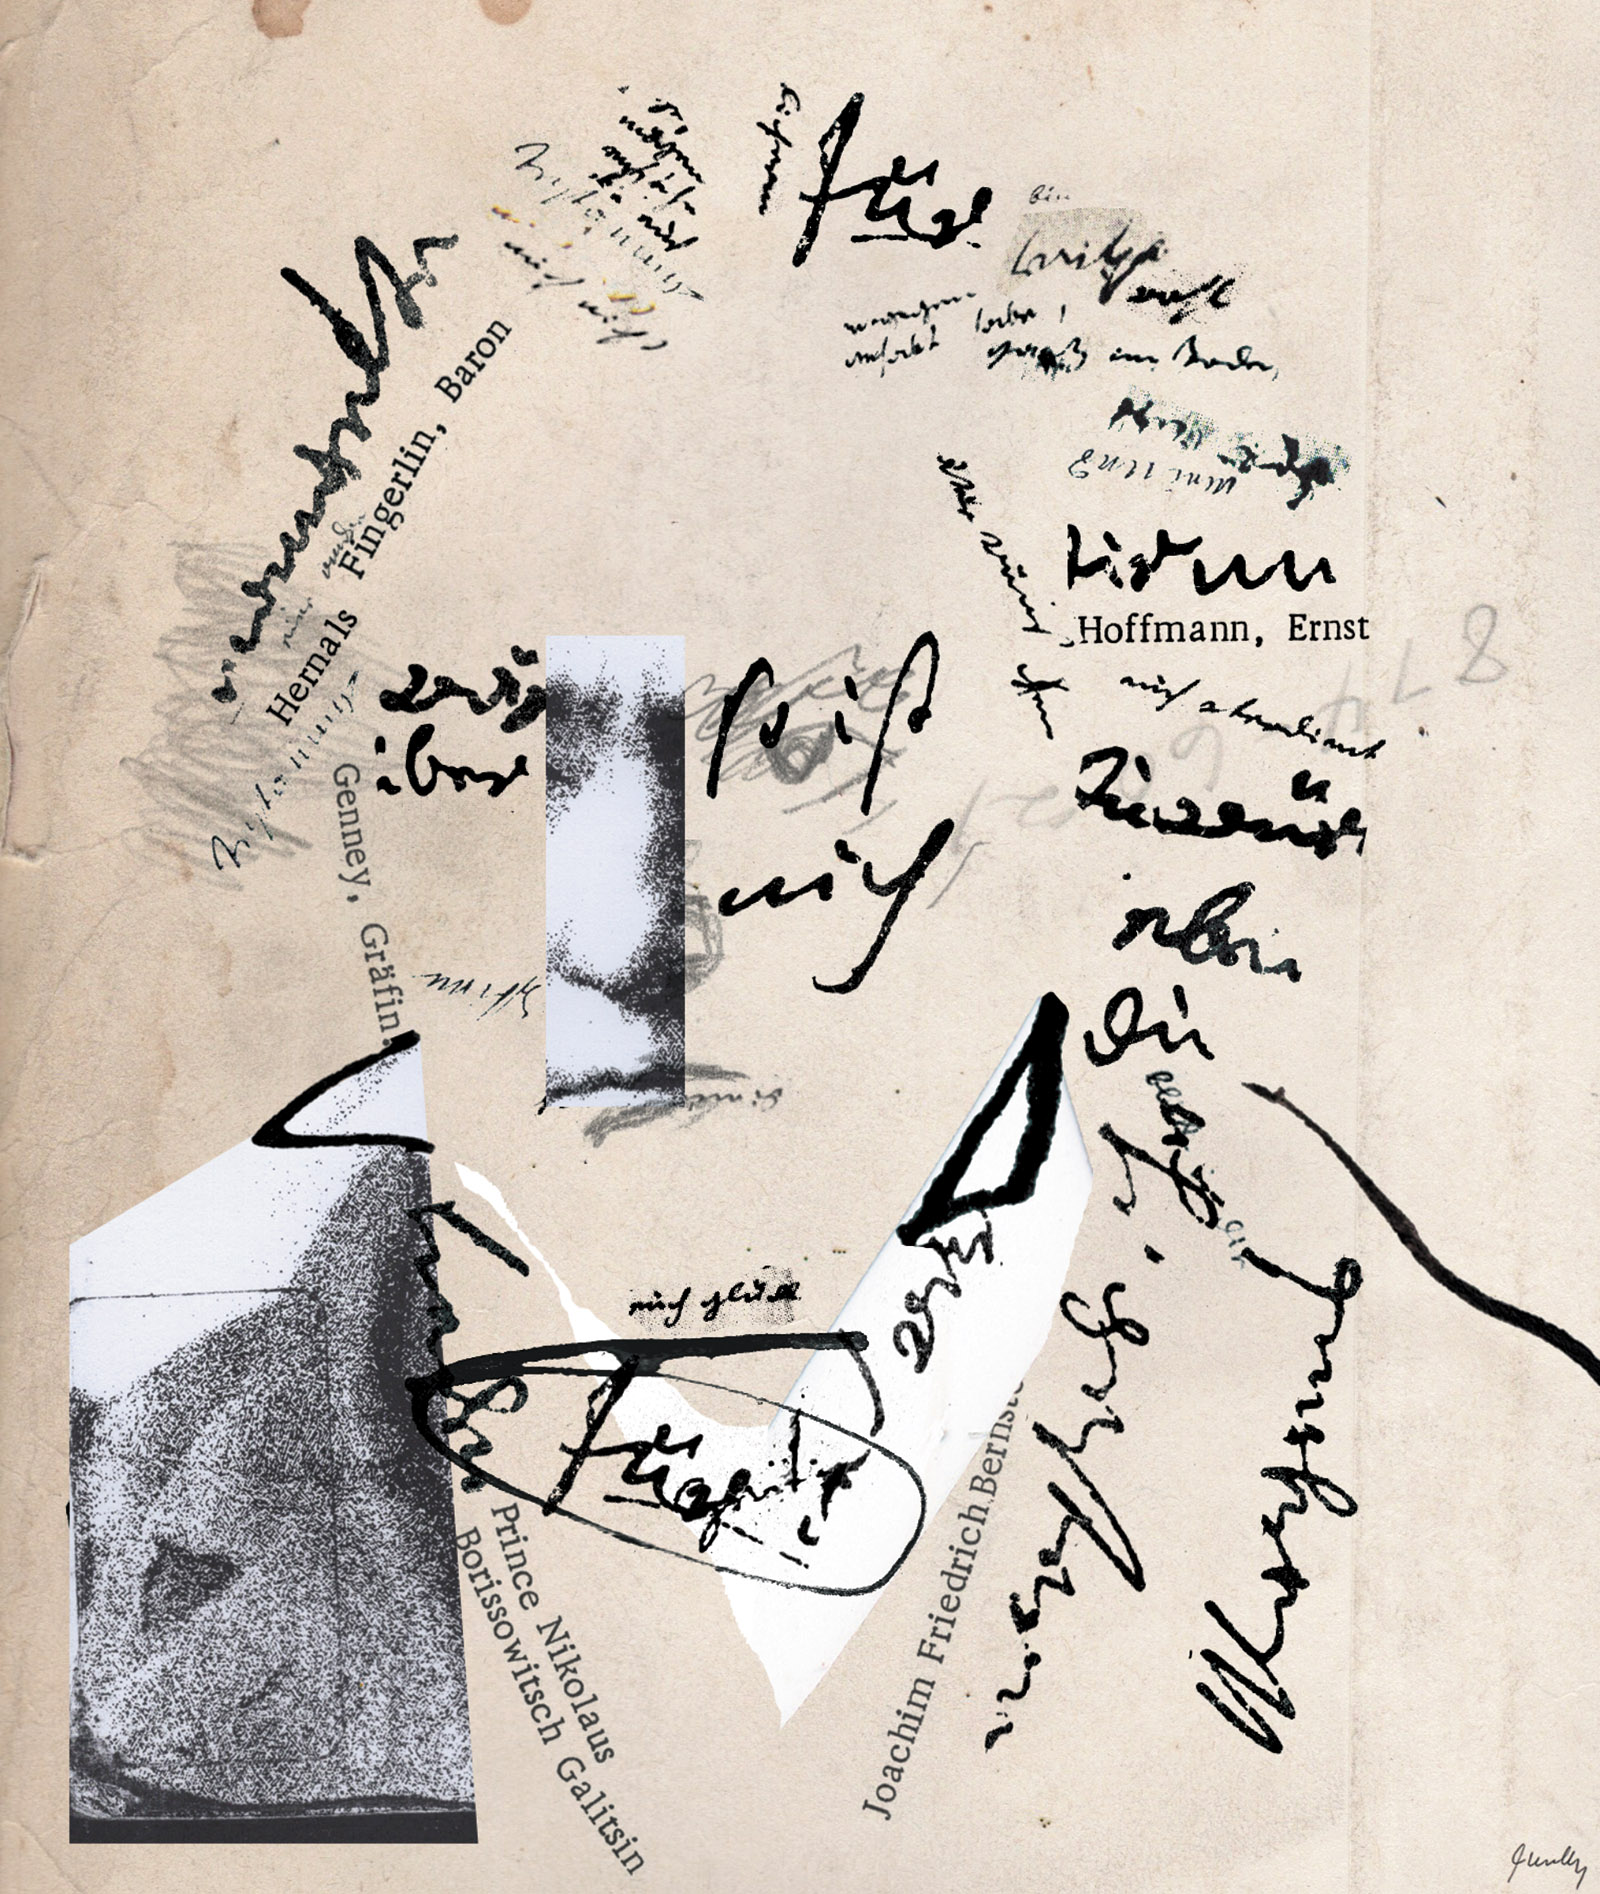 Beethoven’s Empire of the Mind